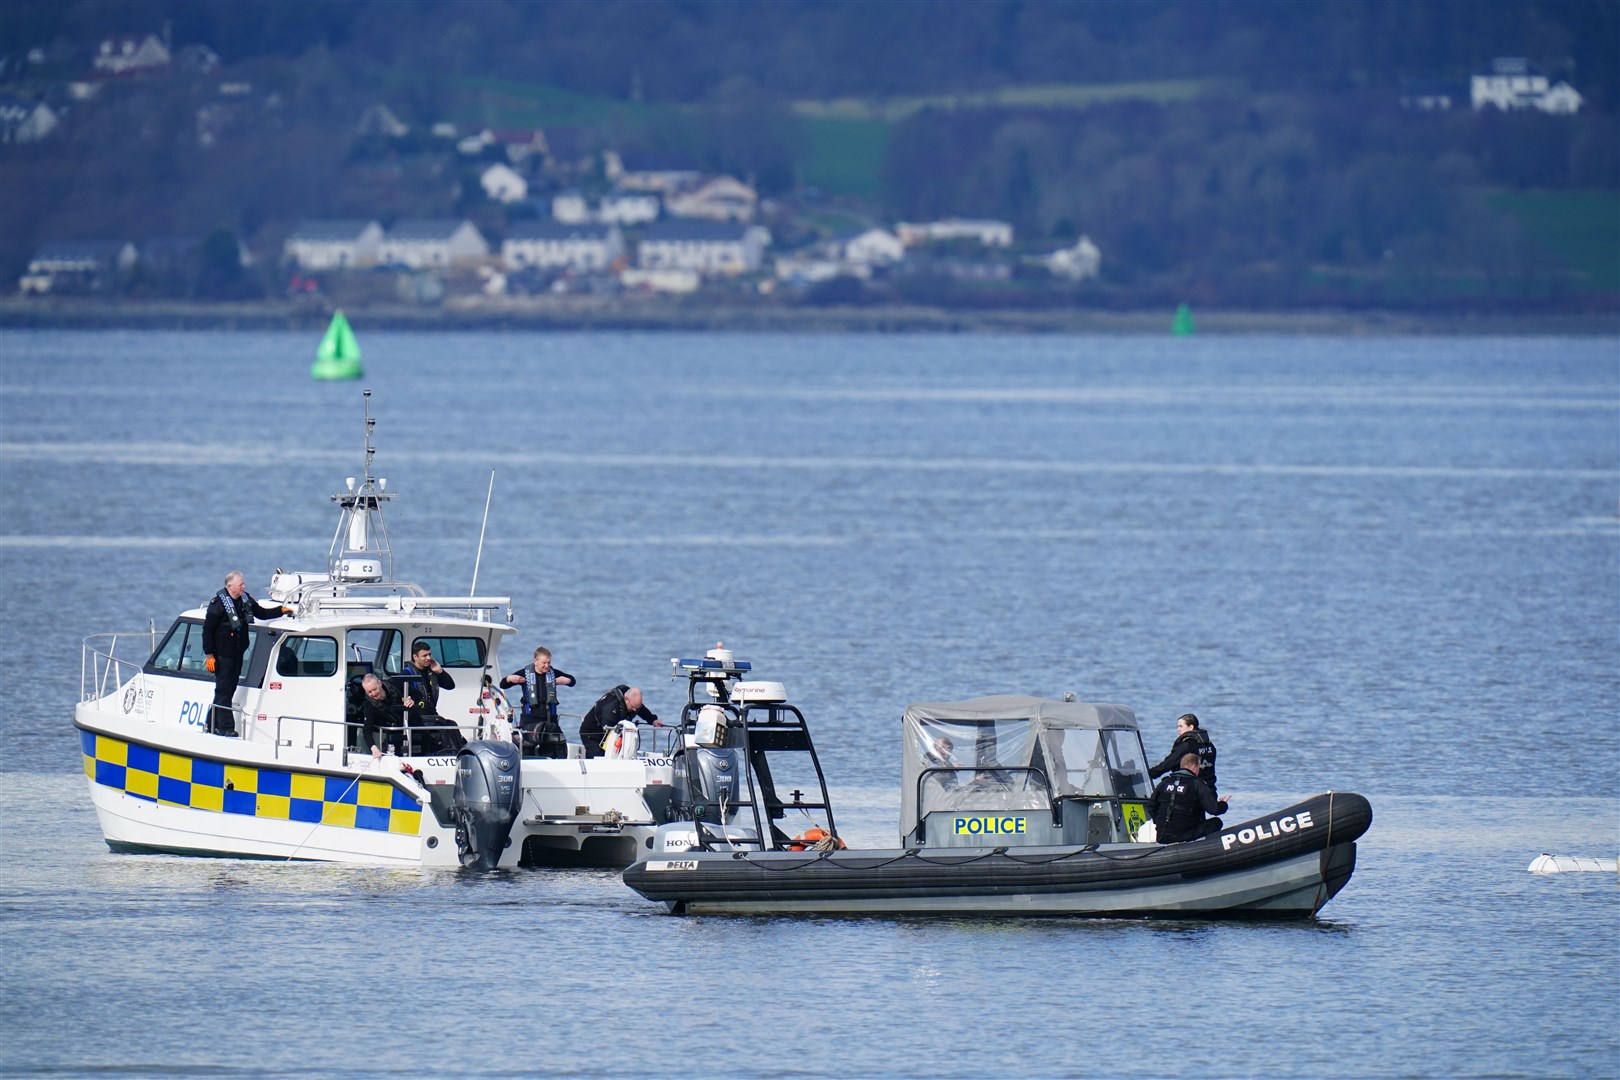 The search operation had resumed again on Saturday. (Jane Barlow/PA)